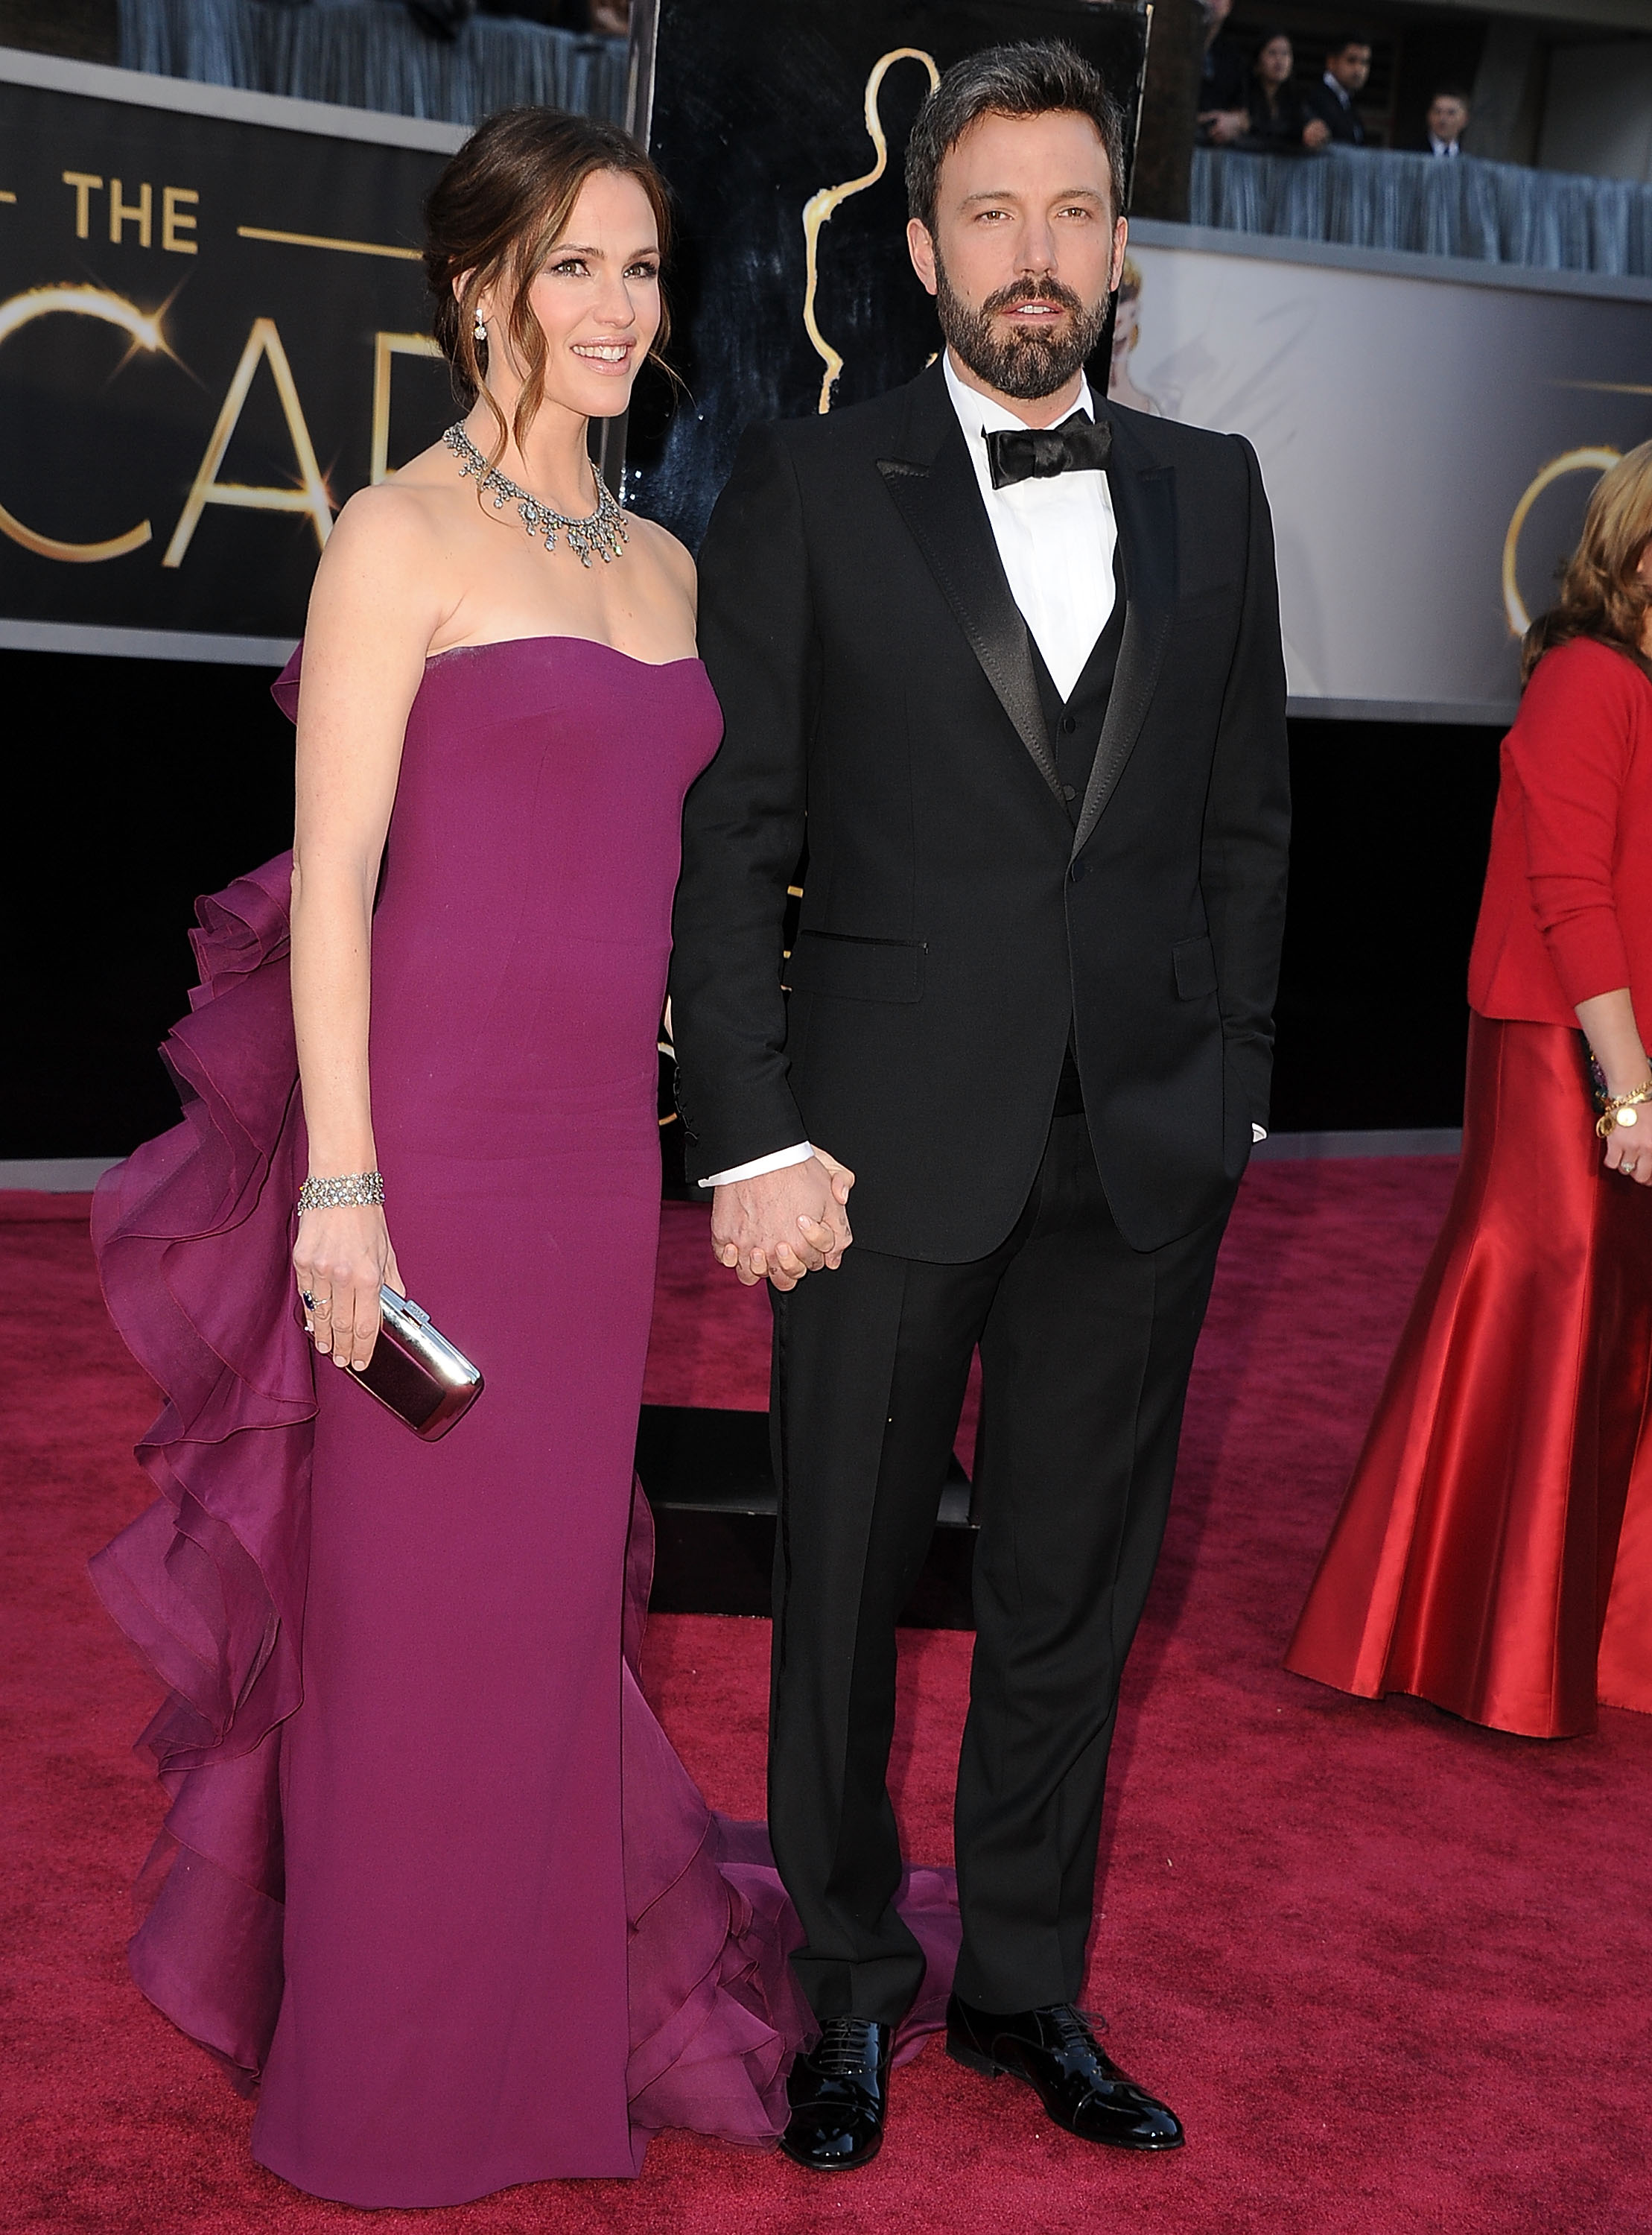 Jennifer Garner and Ben Affleck arrives at the 85th Annual Academy Awards at Dolby Theatre on February 24, 2013 in Hollywood, California. | Source: Getty Images